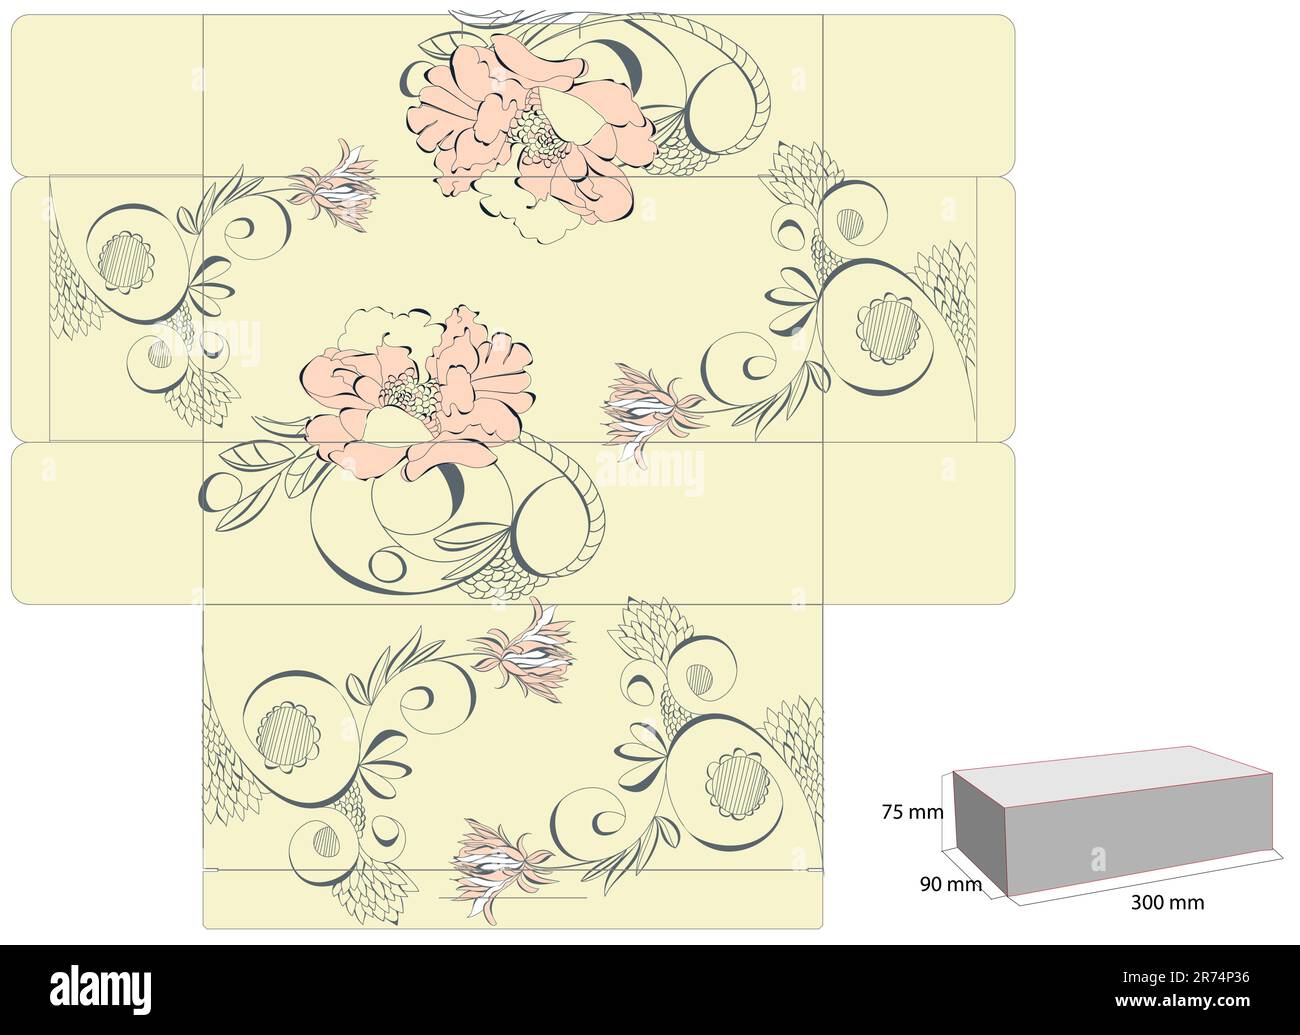 Vintage template for box design Stock Vector